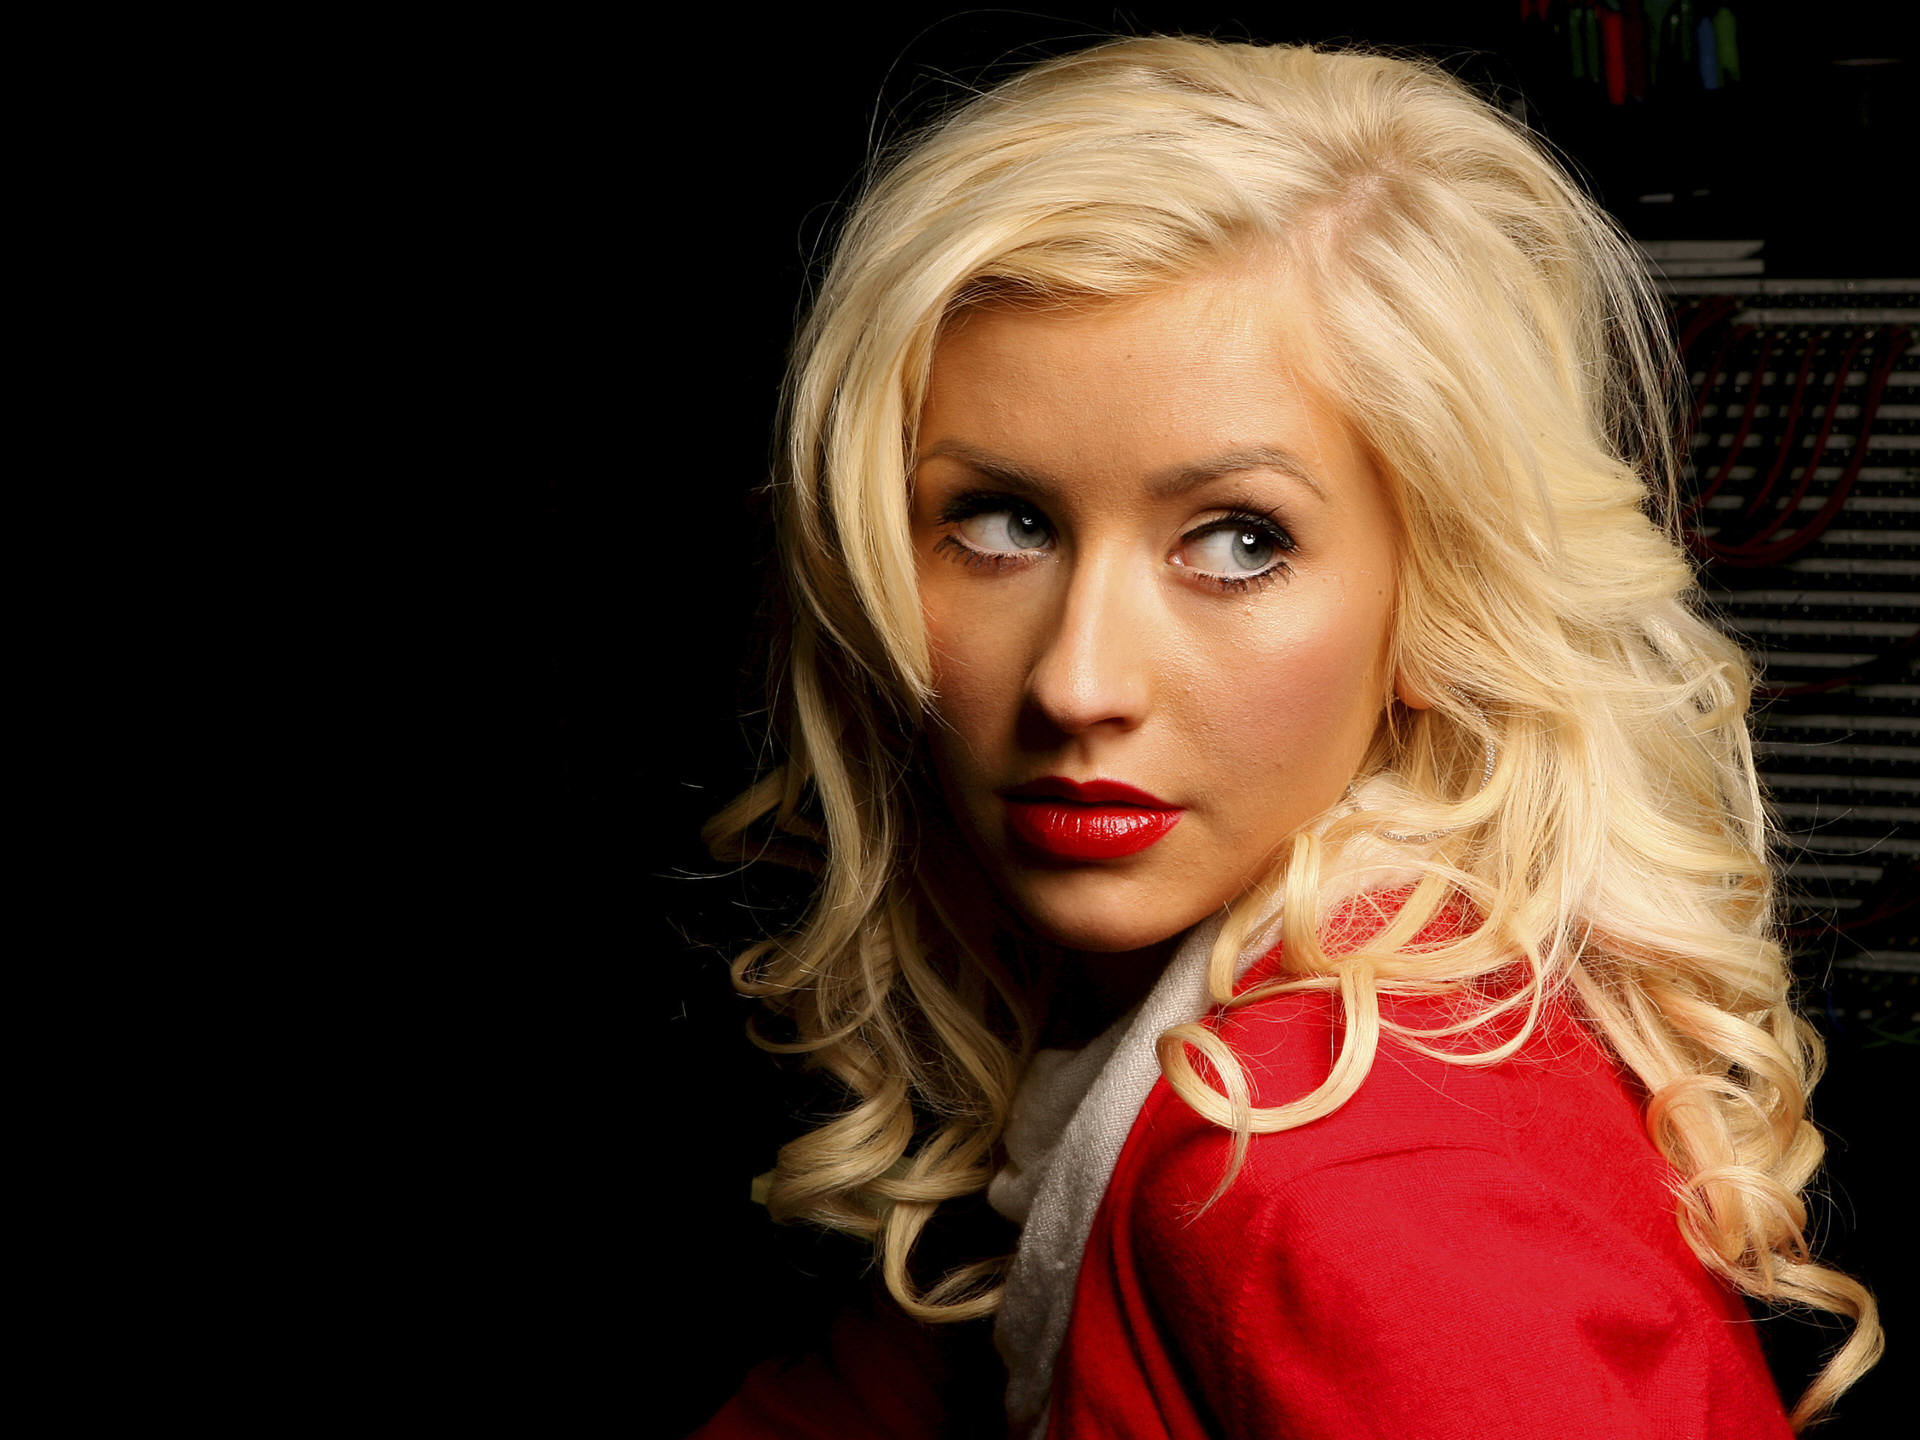 Are Ing The Christina Aguilera Wallpaper Named